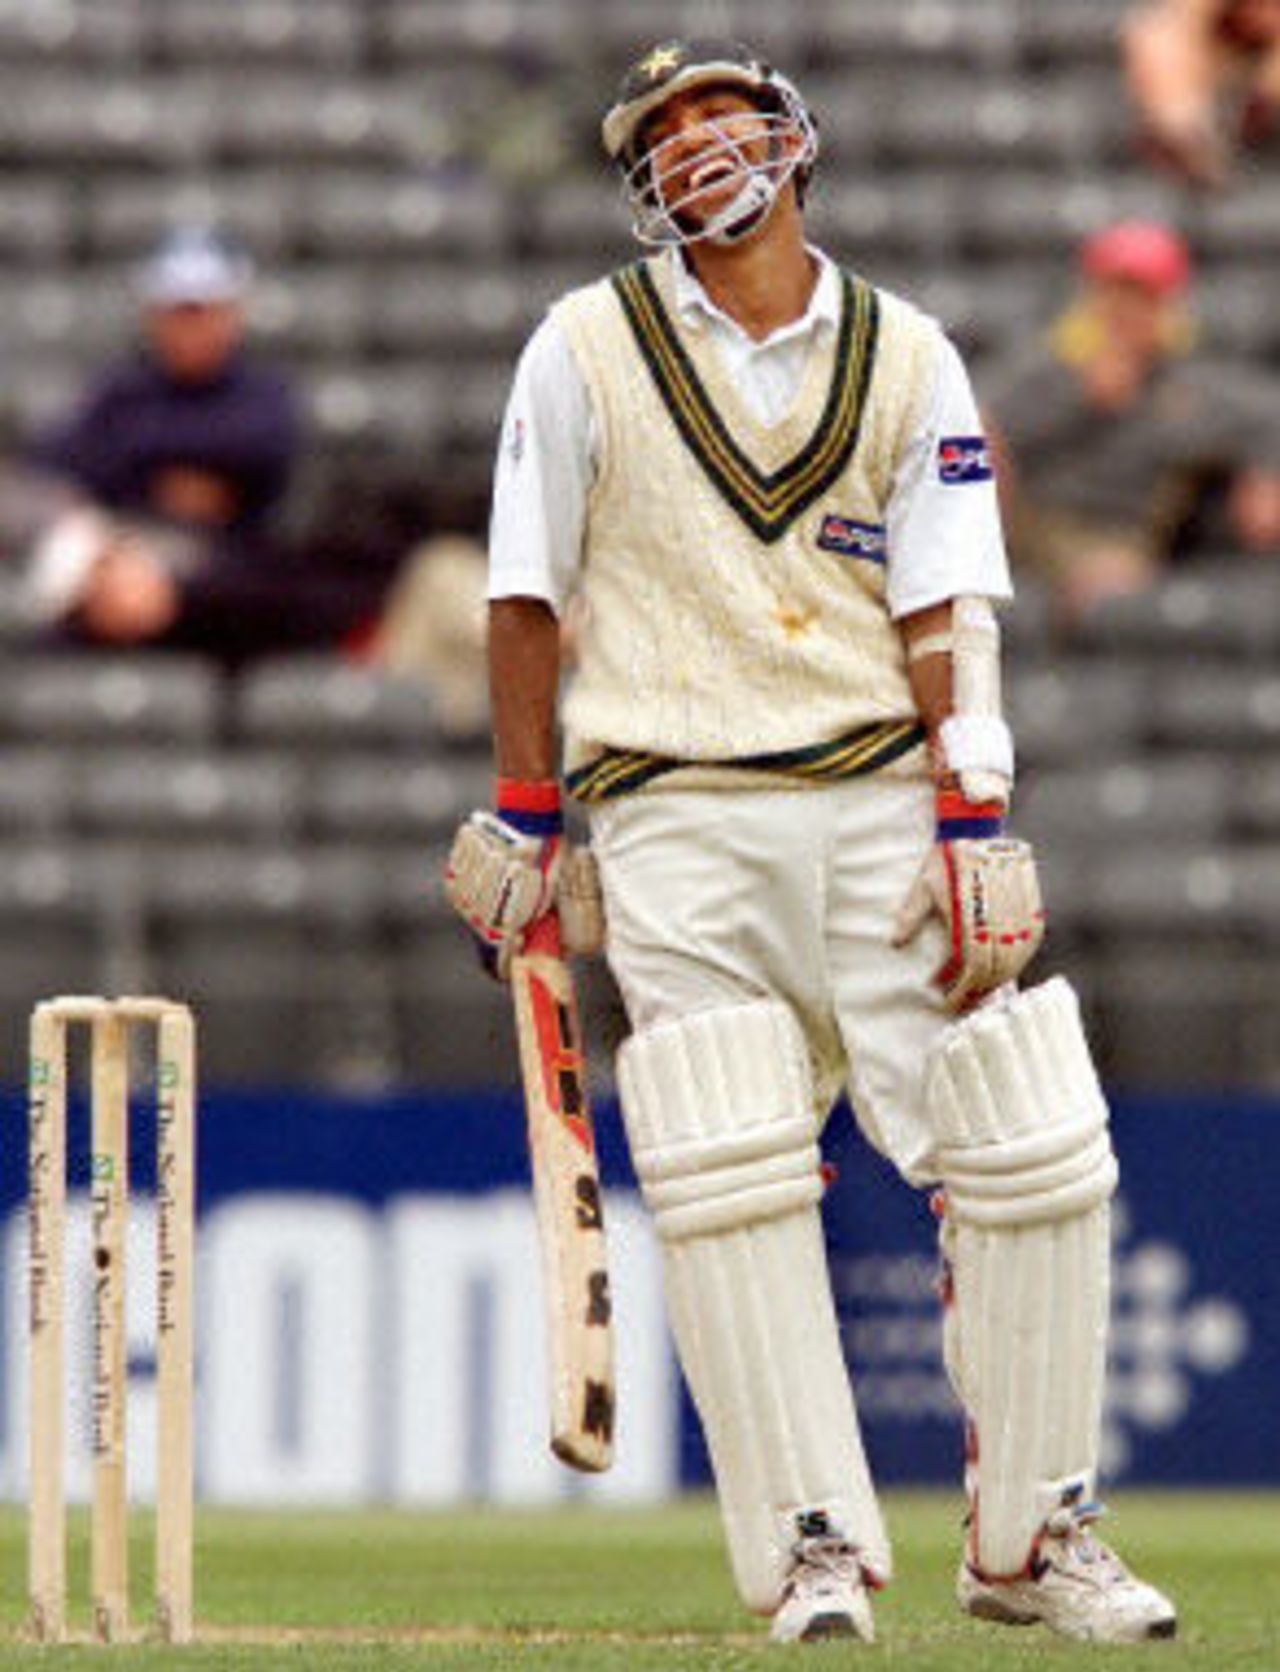 Yousuf Youhana laughs after taking evasive action to avoid a bouncer from paceman Daryl Tuffey, day 3, 2nd Test at Christchurch, 15-19 March 2001.